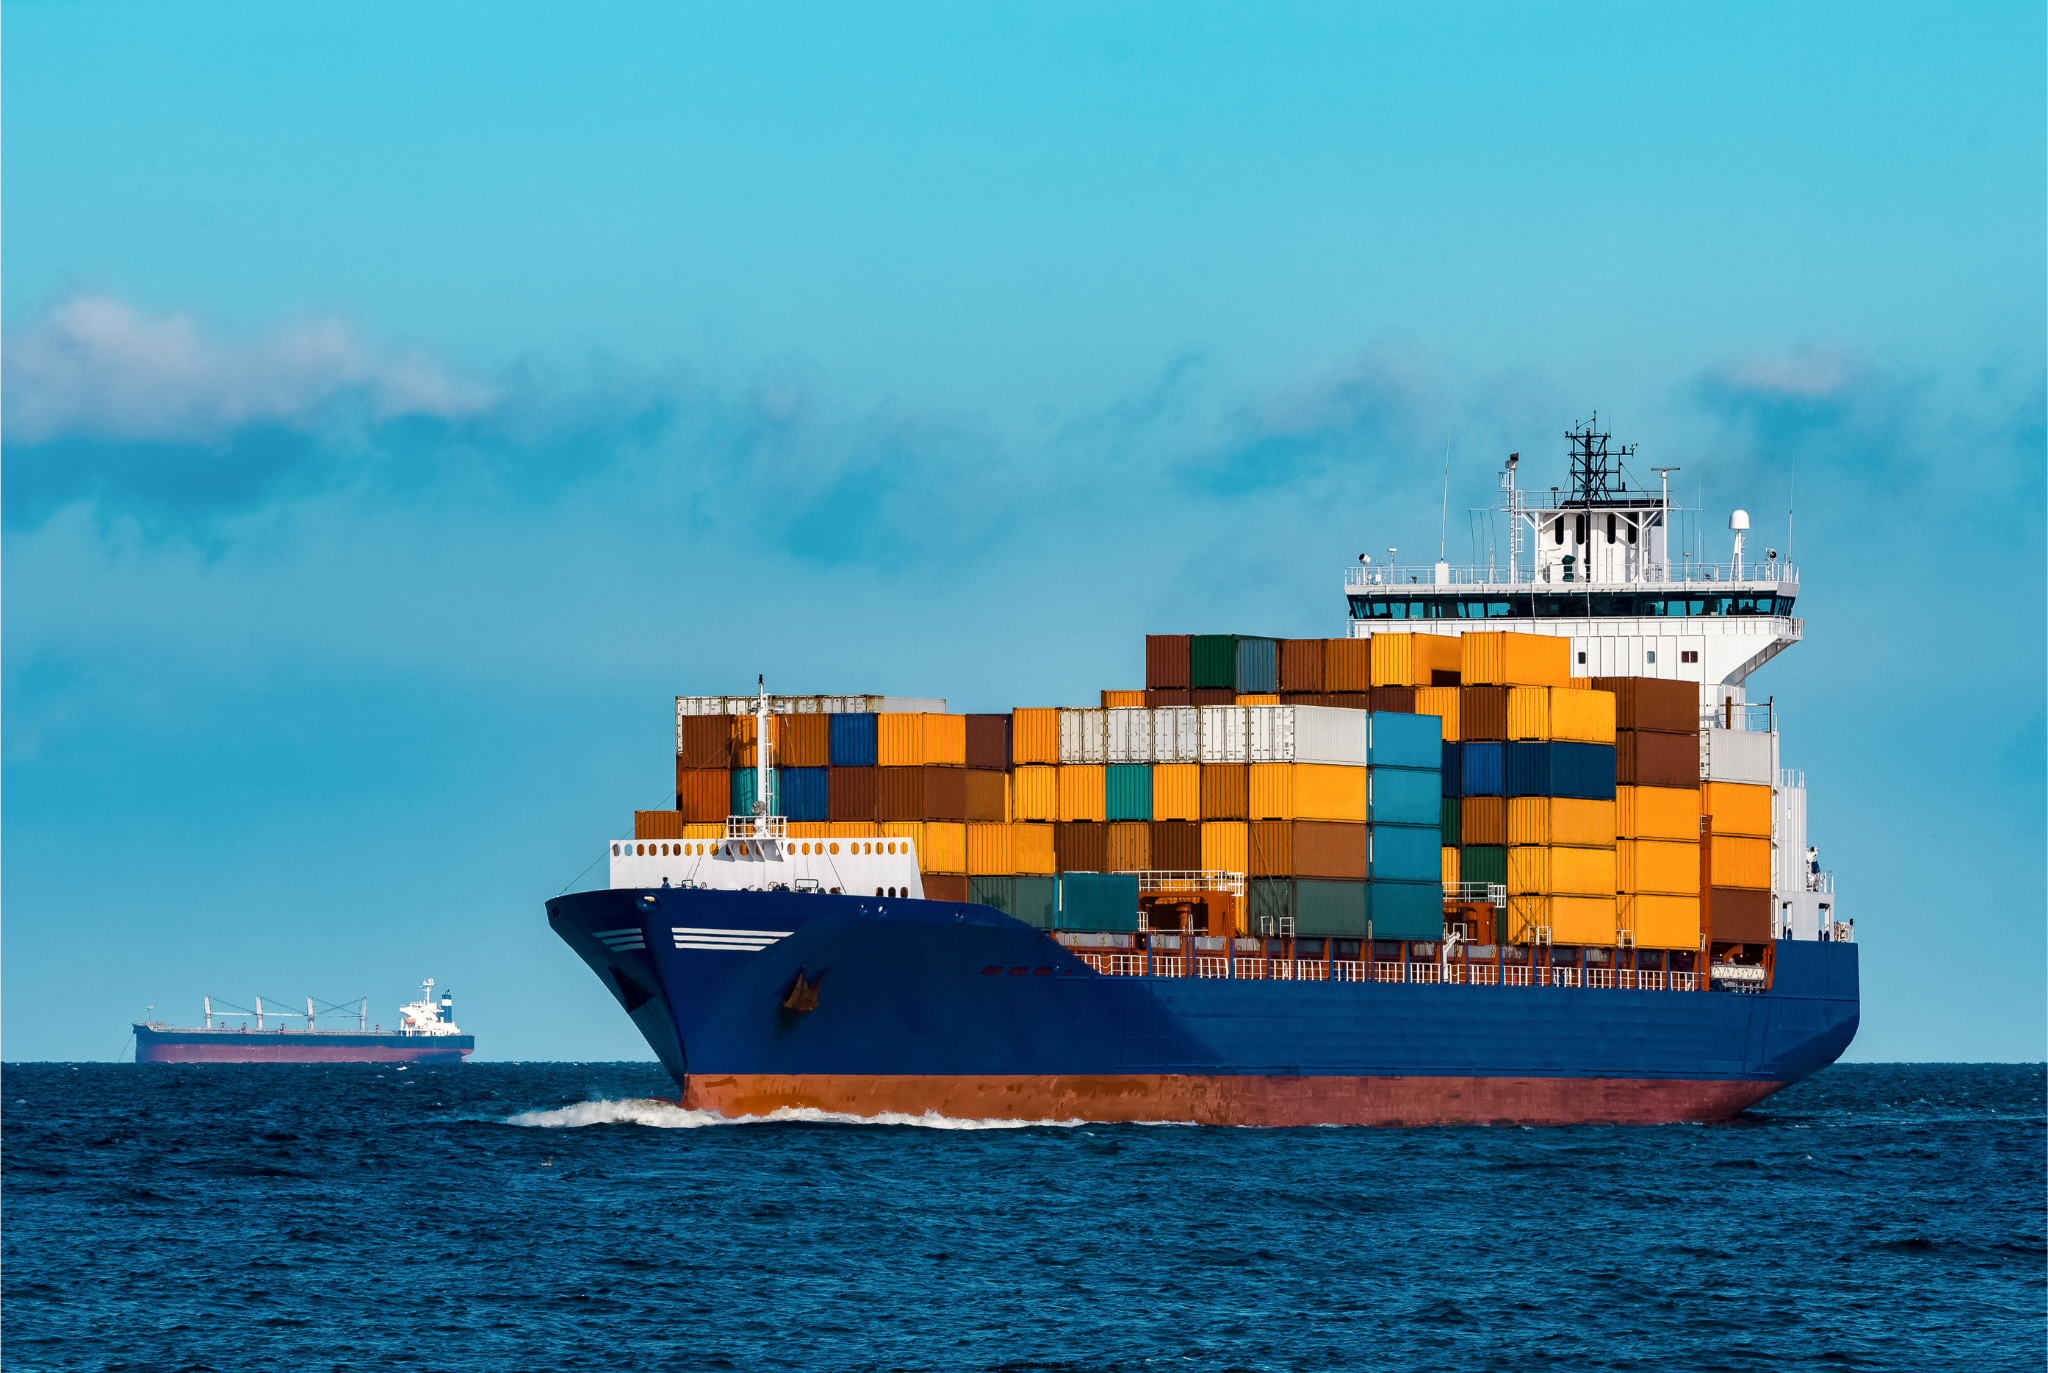 Ocean carrier shipping goods and being managed using a Cargowise integration.